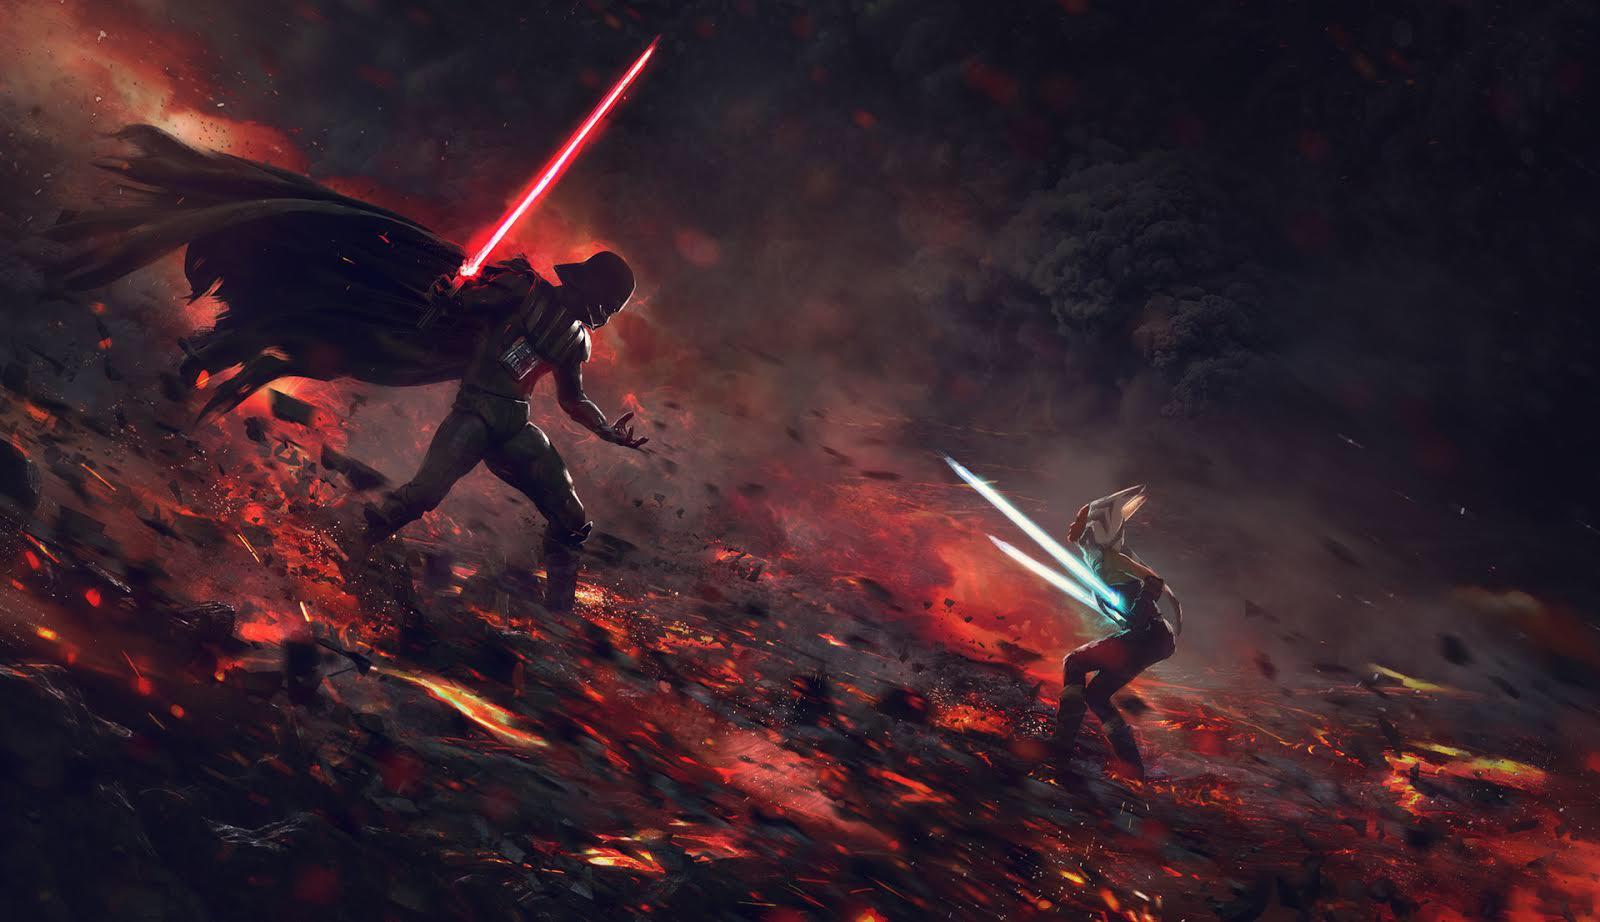 I found thisVader vs Ahsoka recently and finally got the 4K version of it, thought I'd post it on here in case anyone else wanted to use it too, it's a badass